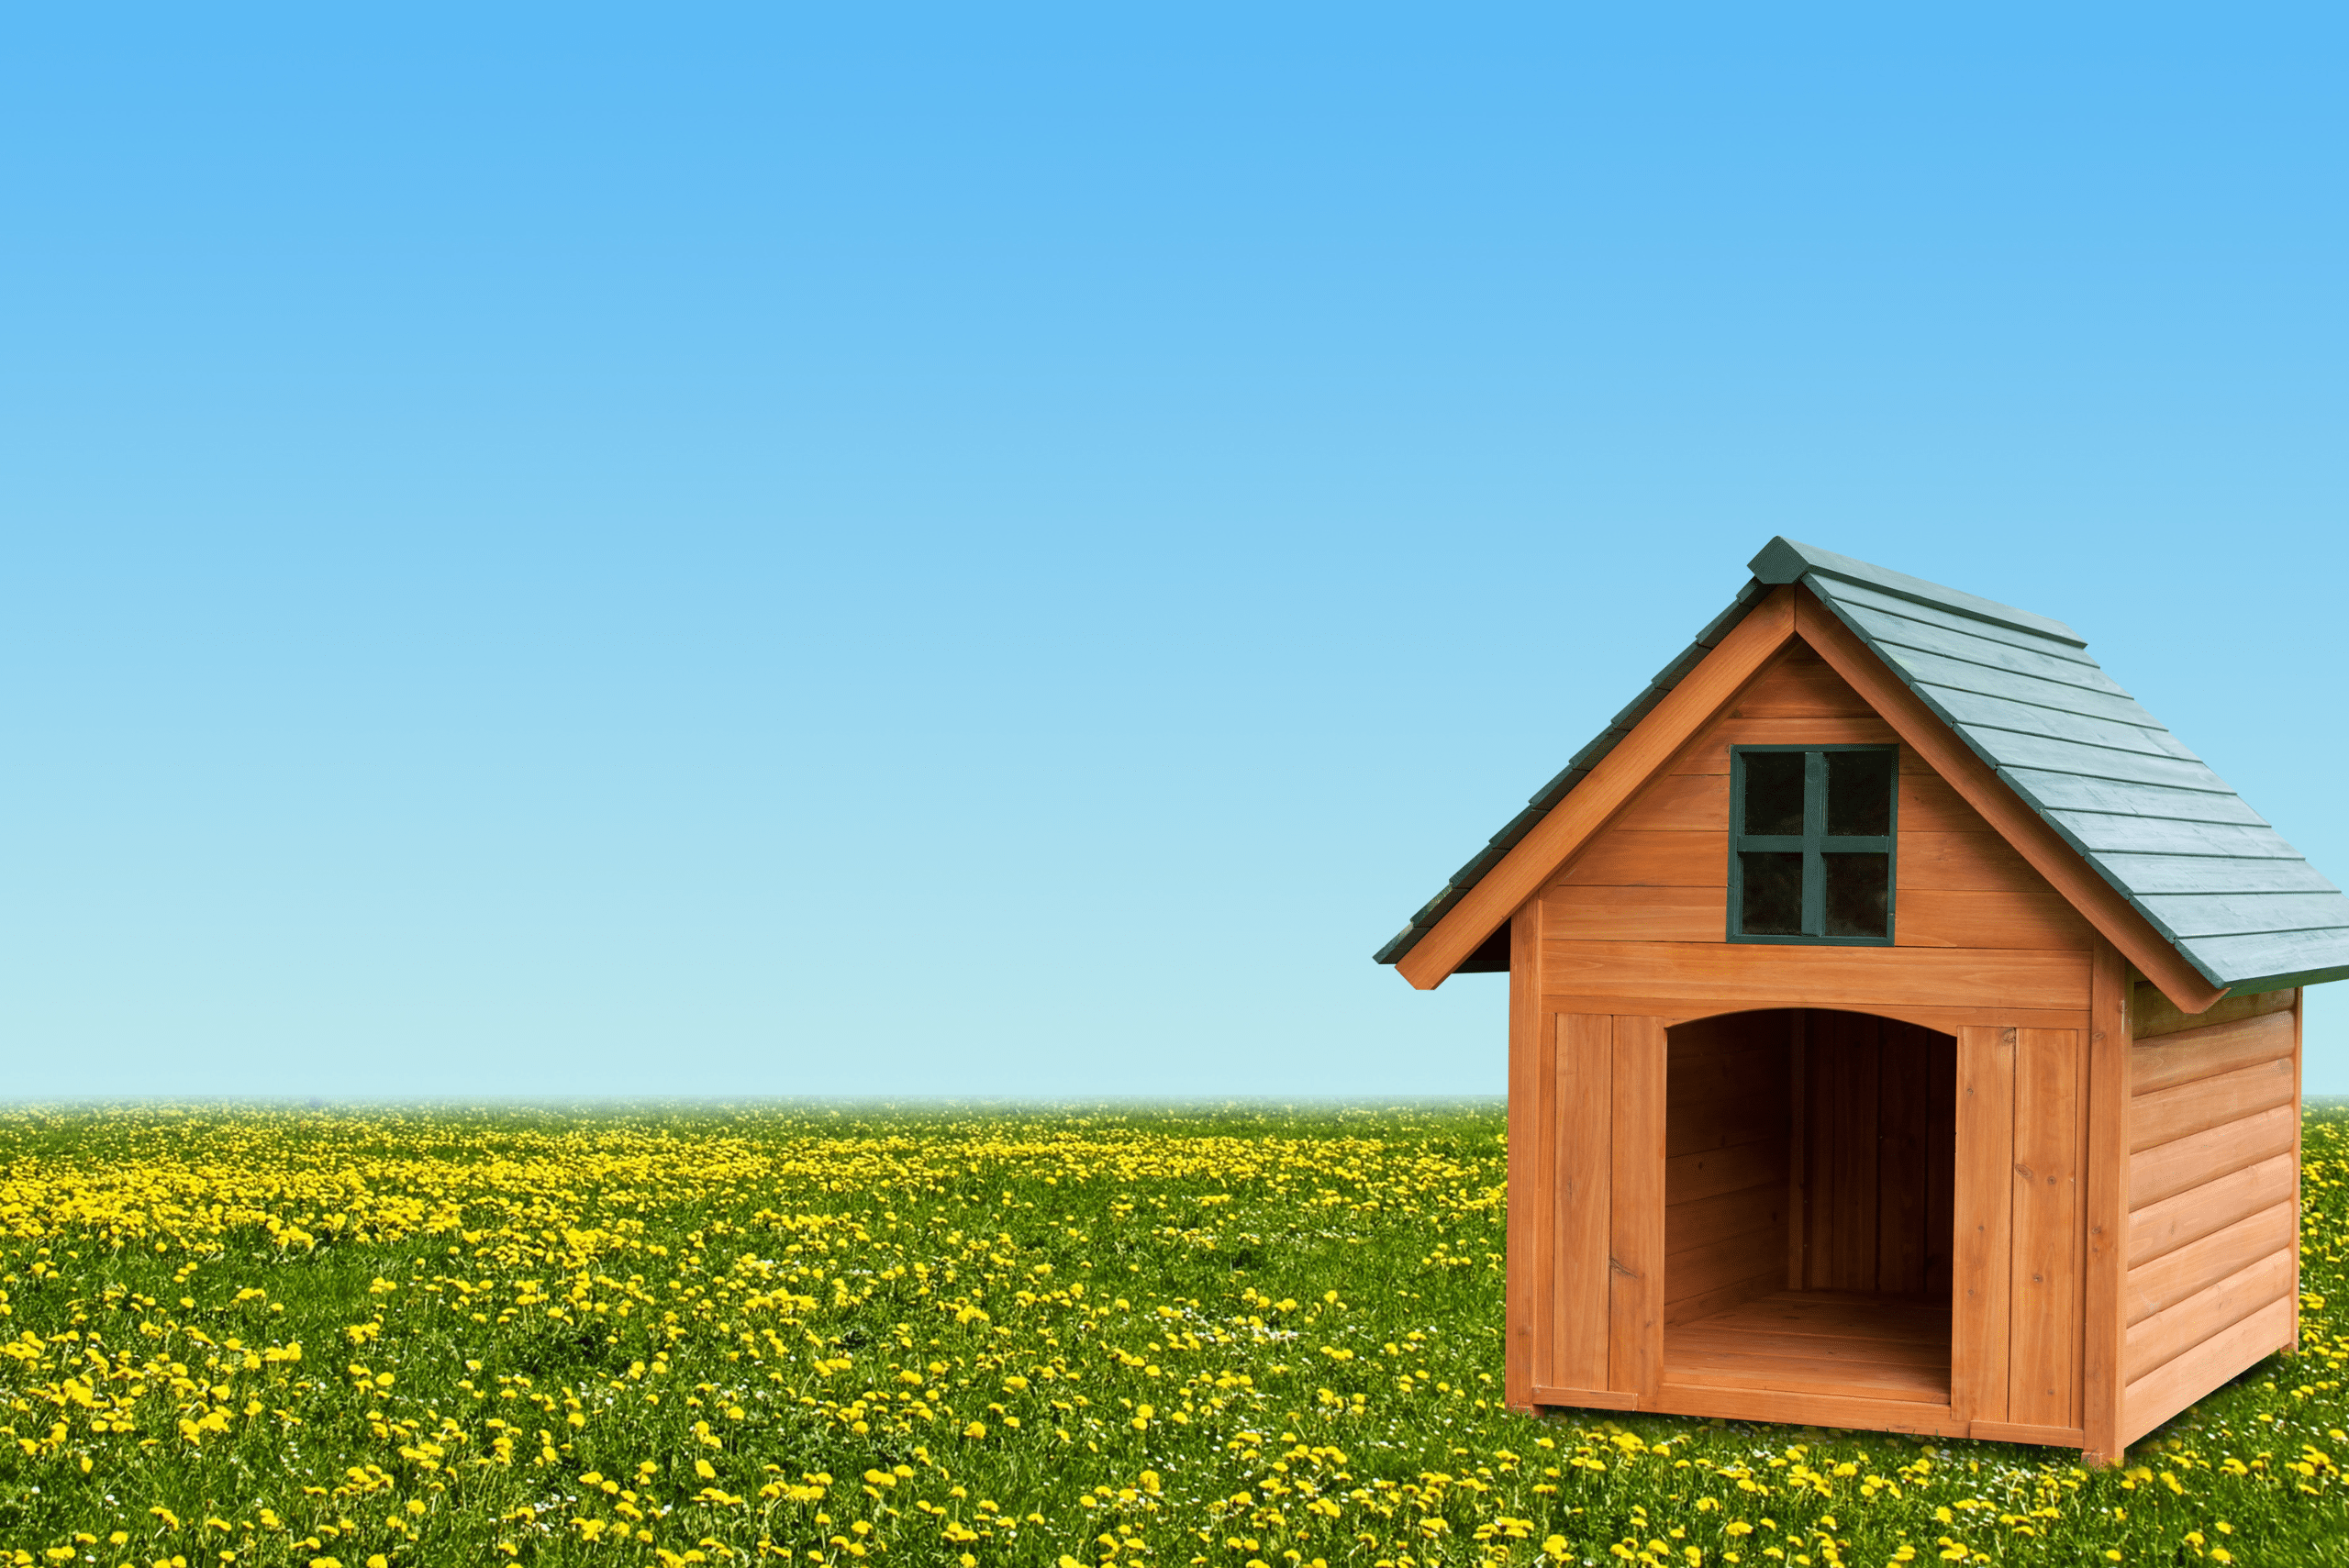 A wooden dog house on grass with a green roof and window.